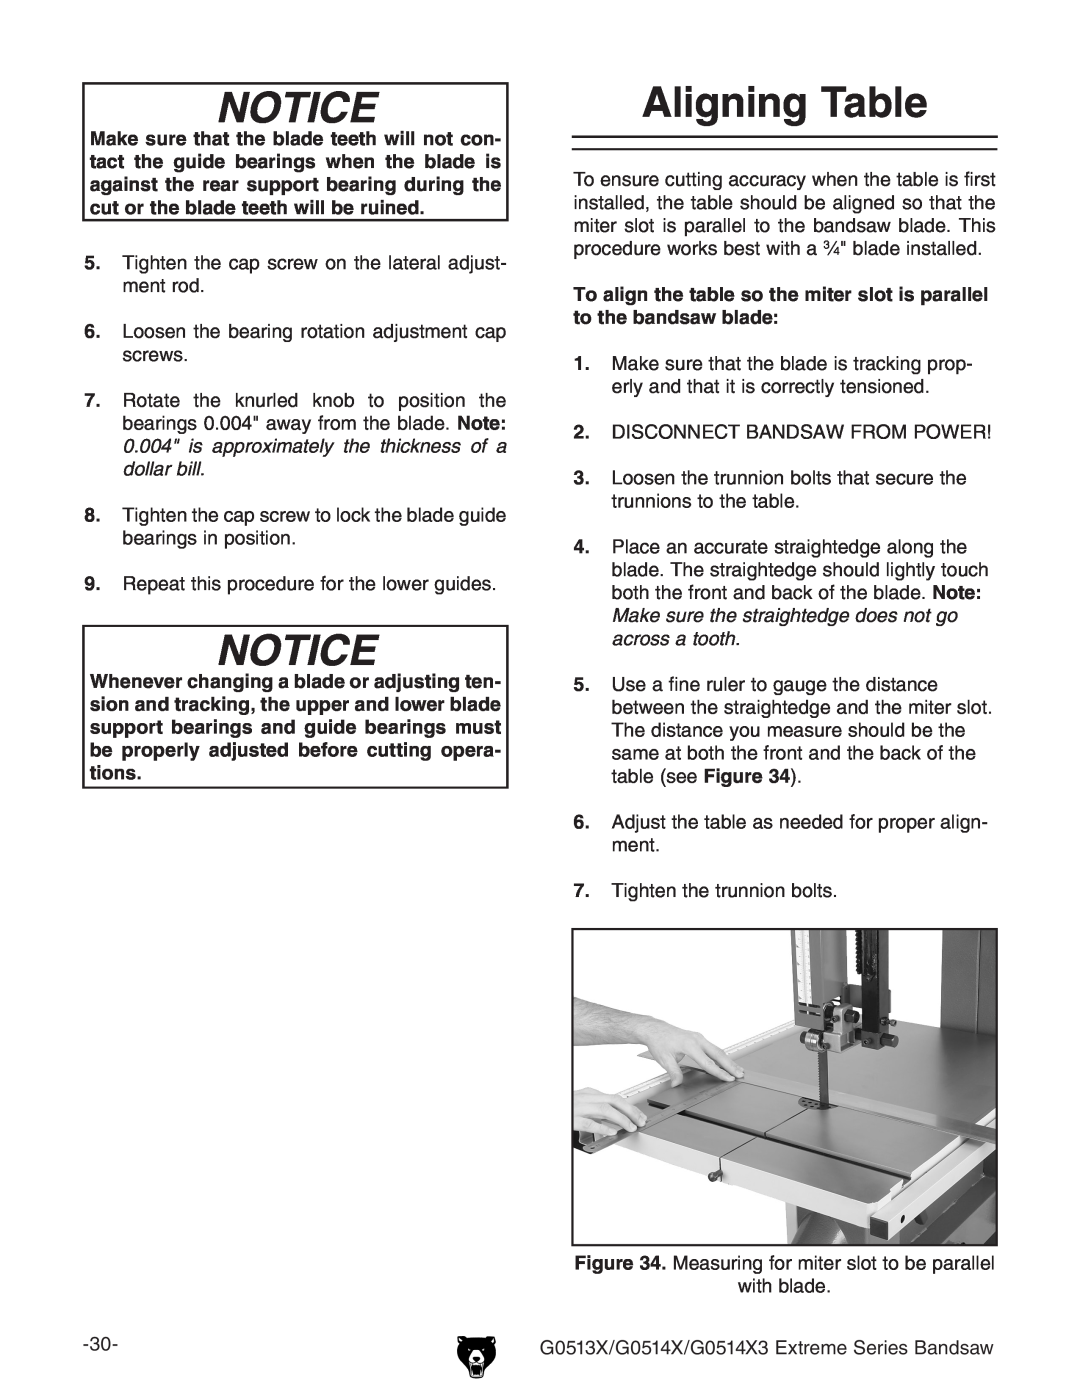 Grizzly G0514X3, G0513X owner manual Aligning Table 